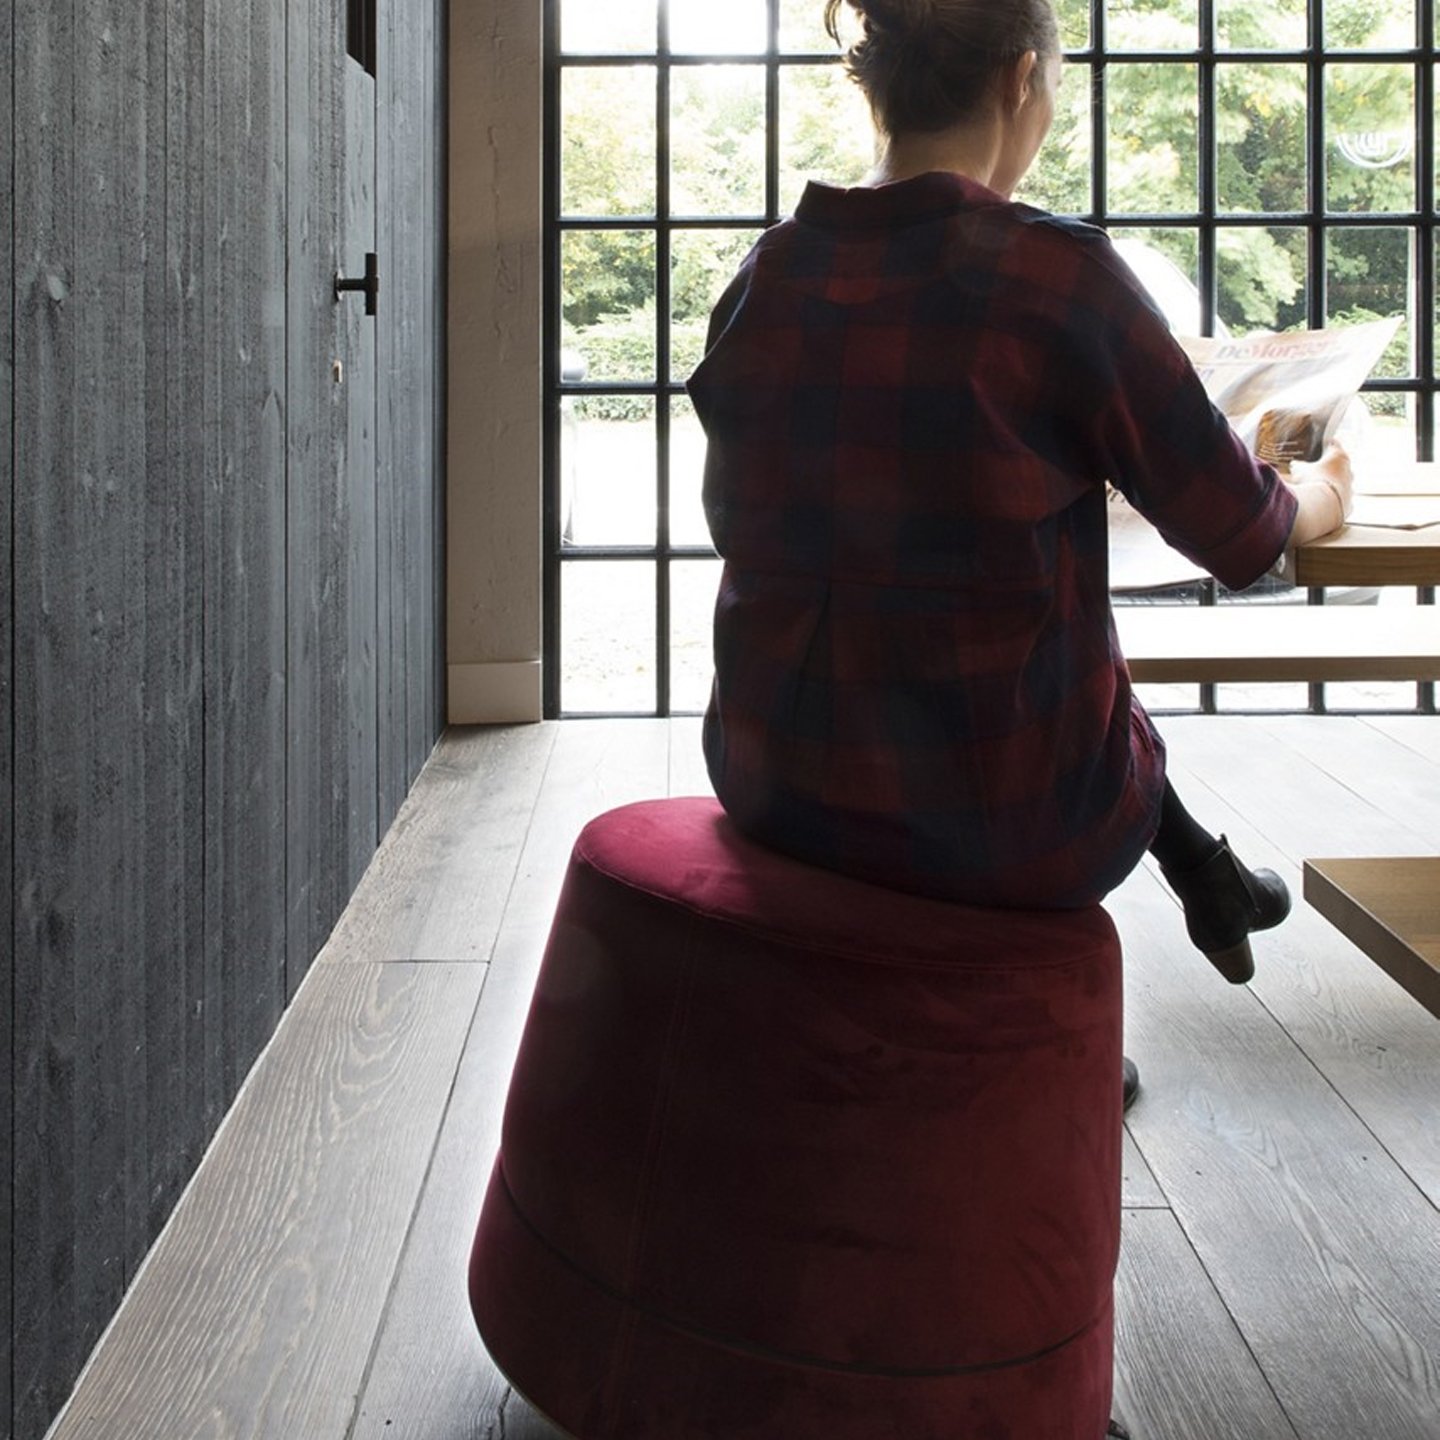 Haworth Buzzibalance pouf in red color at a cafe with movement activator and acoustic performance features